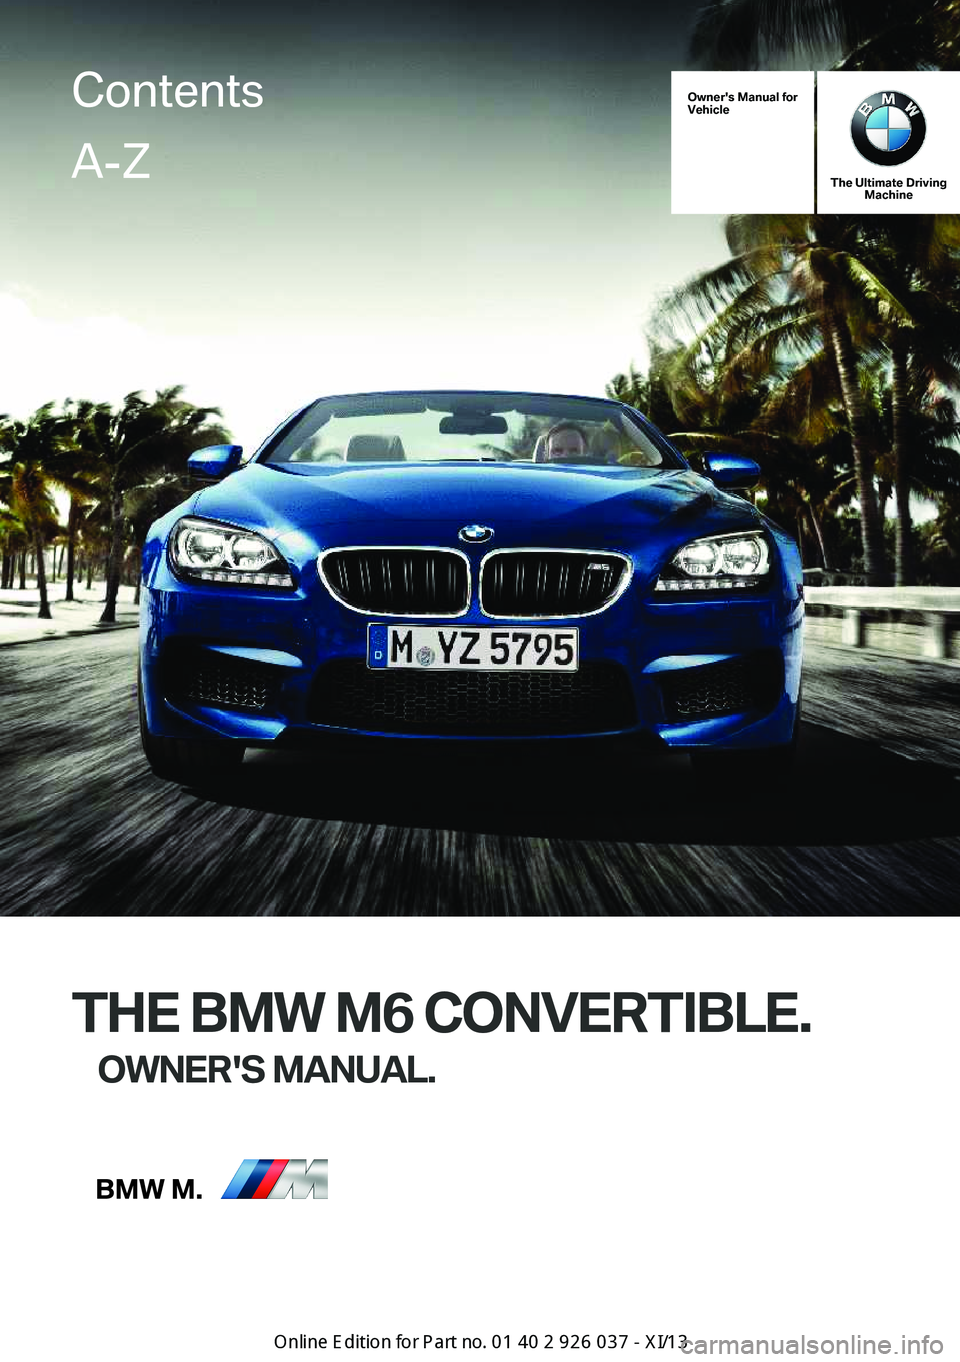 BMW M6 CONVERTIBLE 2013 F12 Owners Manual Owner's Manual for
Vehicle
The Ultimate Driving Machine
THE BMW M6 CONVERTIBLE.
OWNER'S MANUAL.
ContentsA-Z
Online Edition for Part no. 01 40 2 910 746 - VI/13   